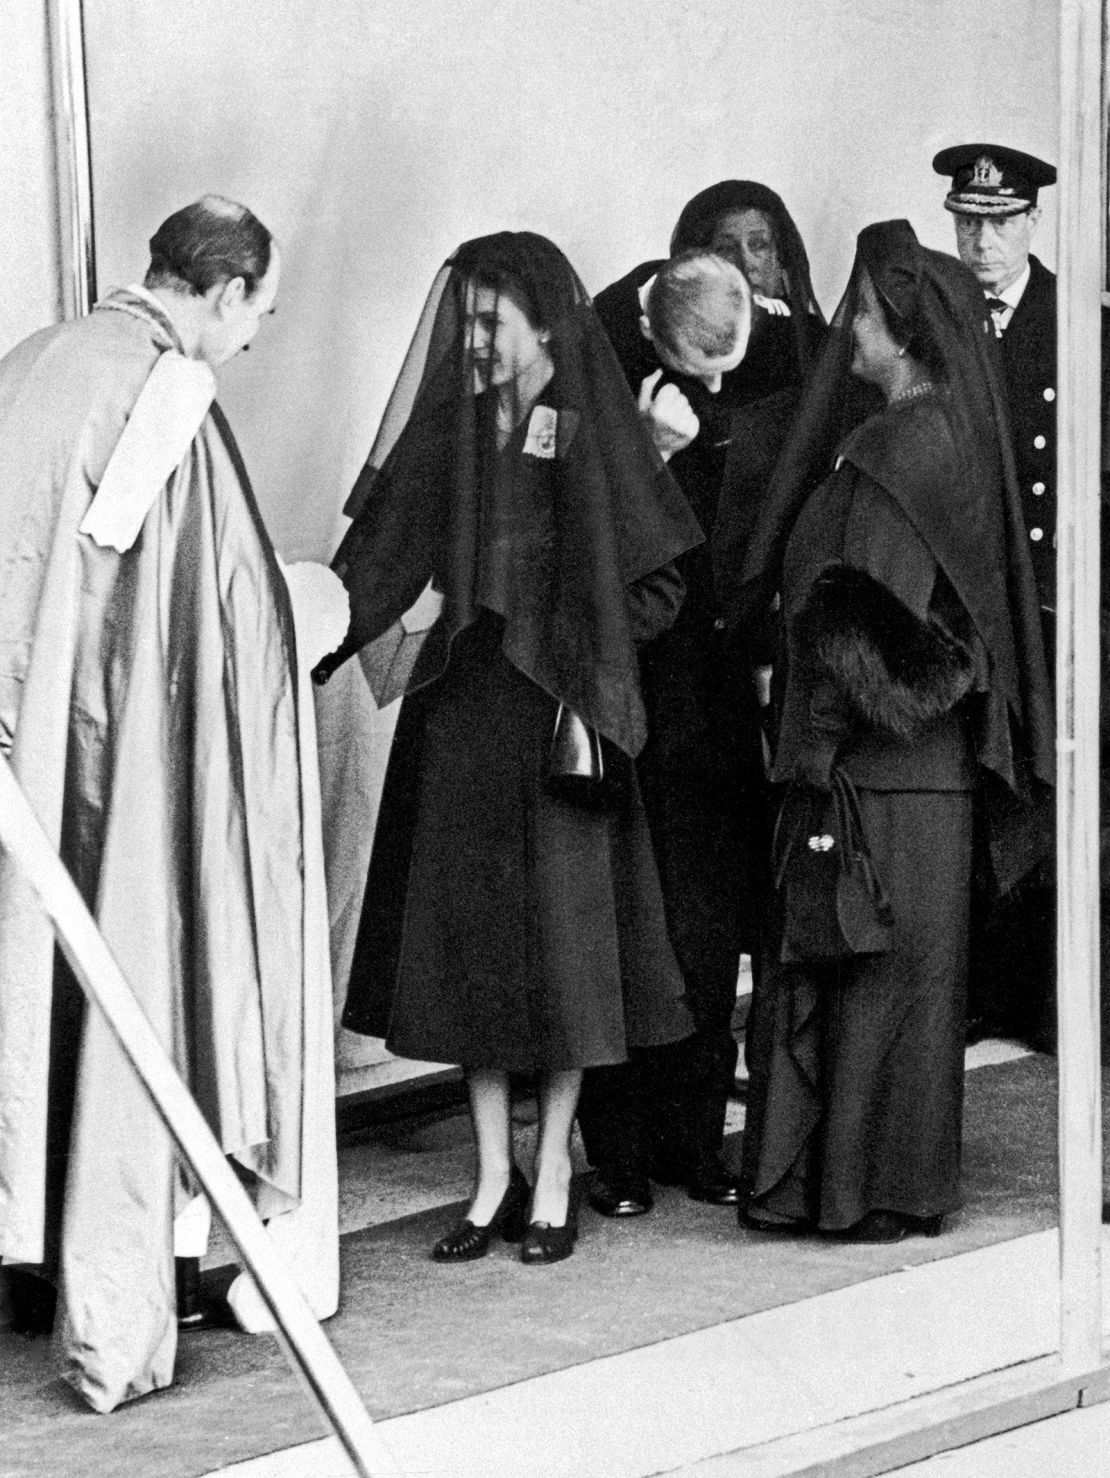 The royal funeral dress code has long been a symbol of grief and propriety. Elizabeth II wore a long veil following the passing of her father, King George VI.